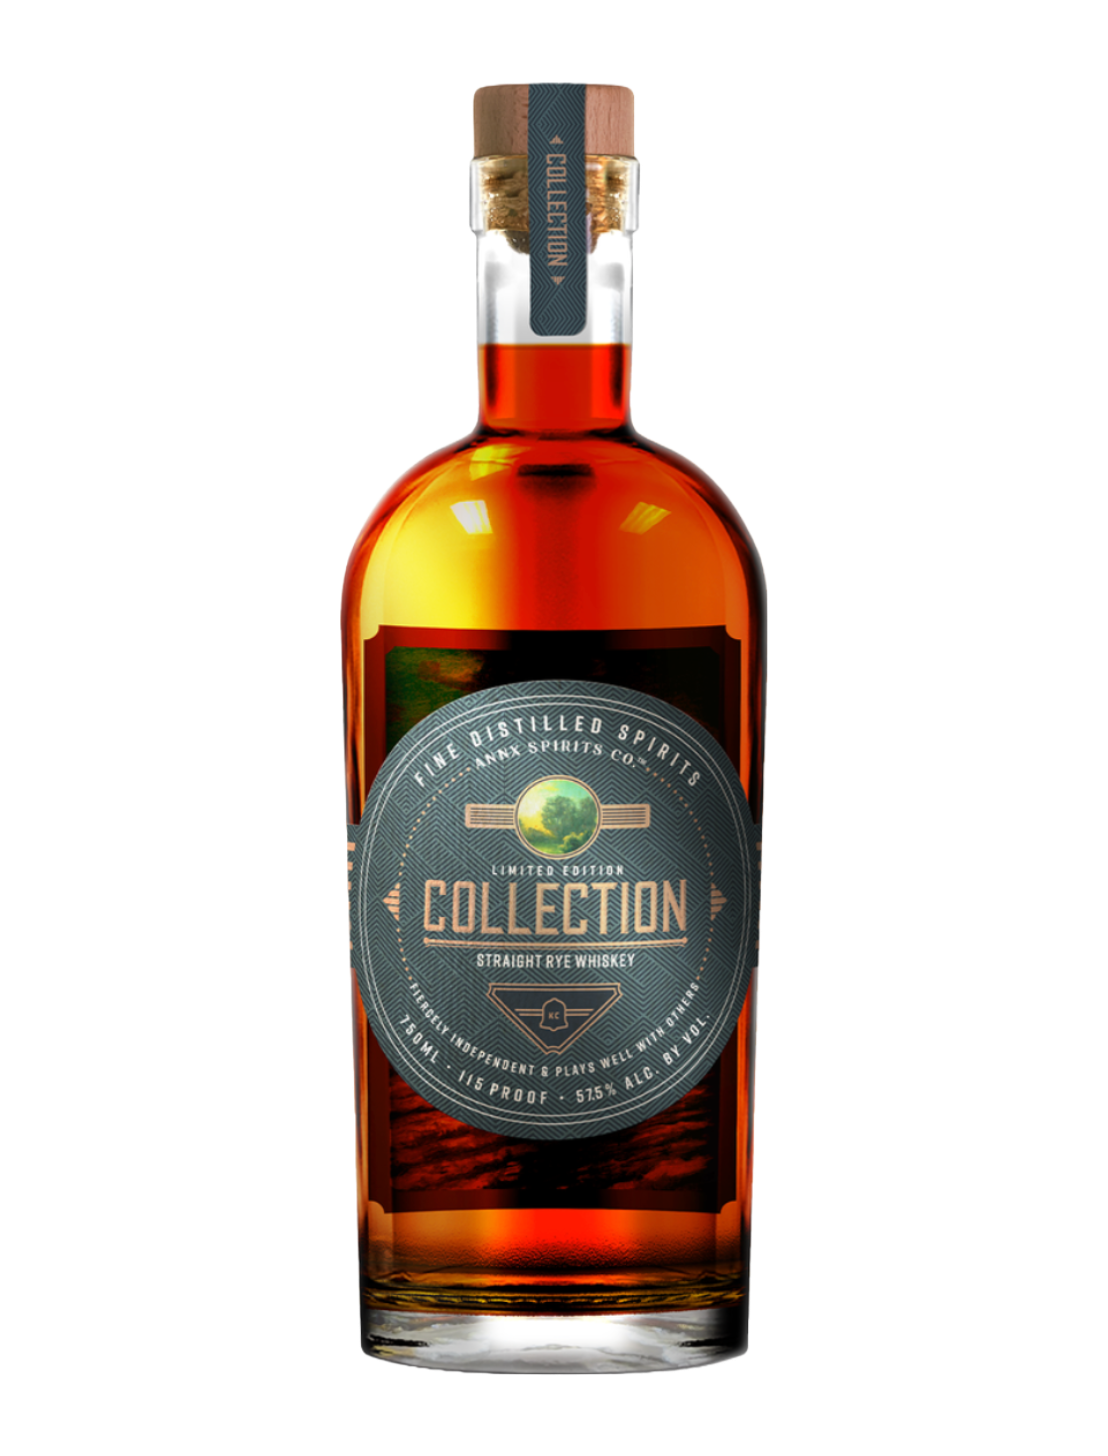 An elegant bottle of ANNX Spirits Co. Collection Rye Whiskey in front of a plain white background